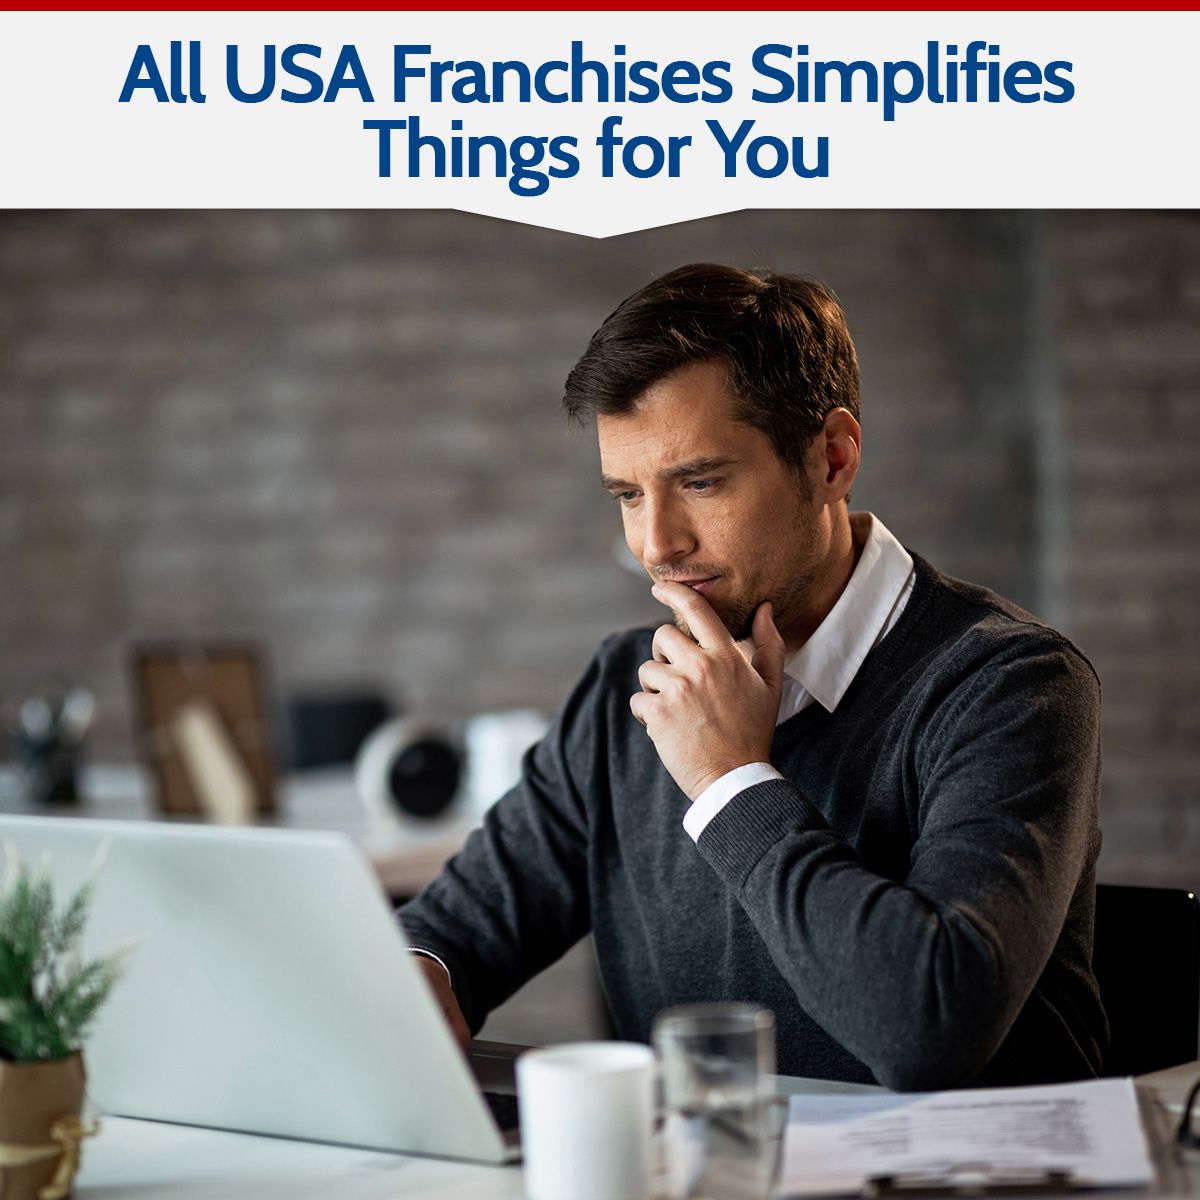 All USA Franchises Simplifies Things for You